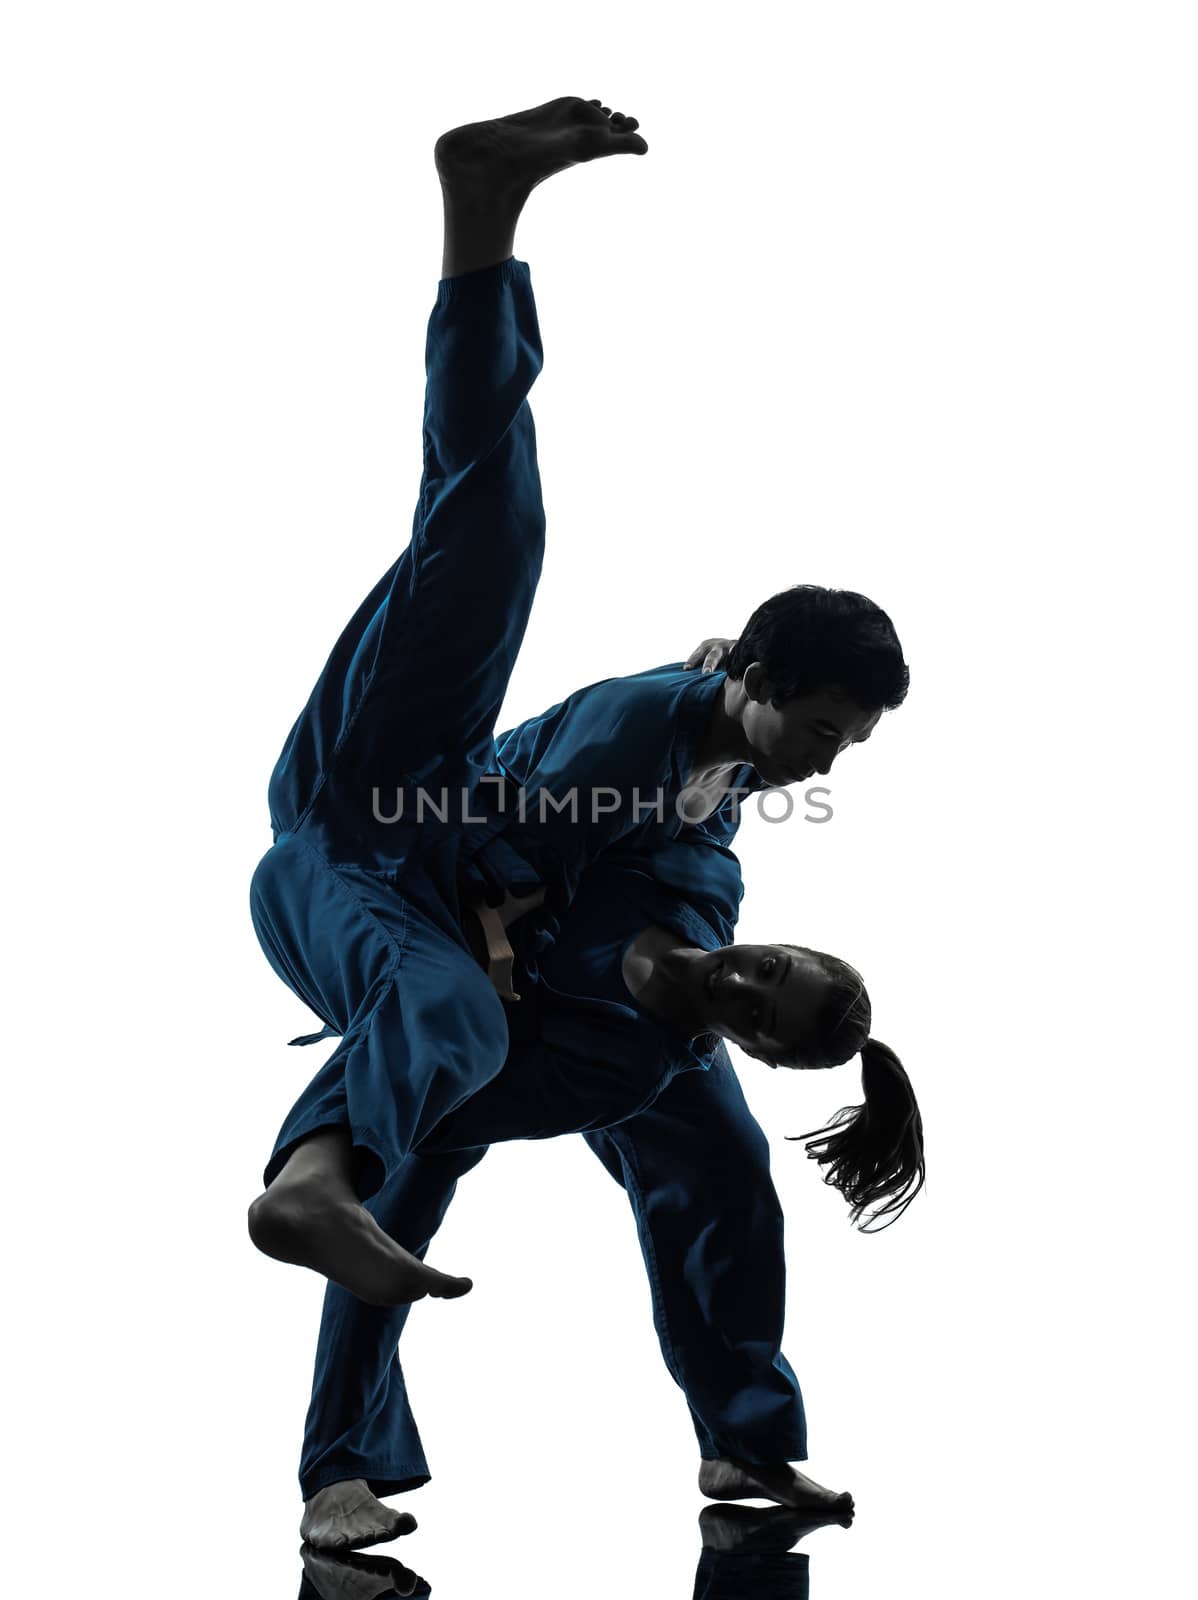 one  man woman couple exercising karate vietvodao martial arts in silhouette studio isolated on white background